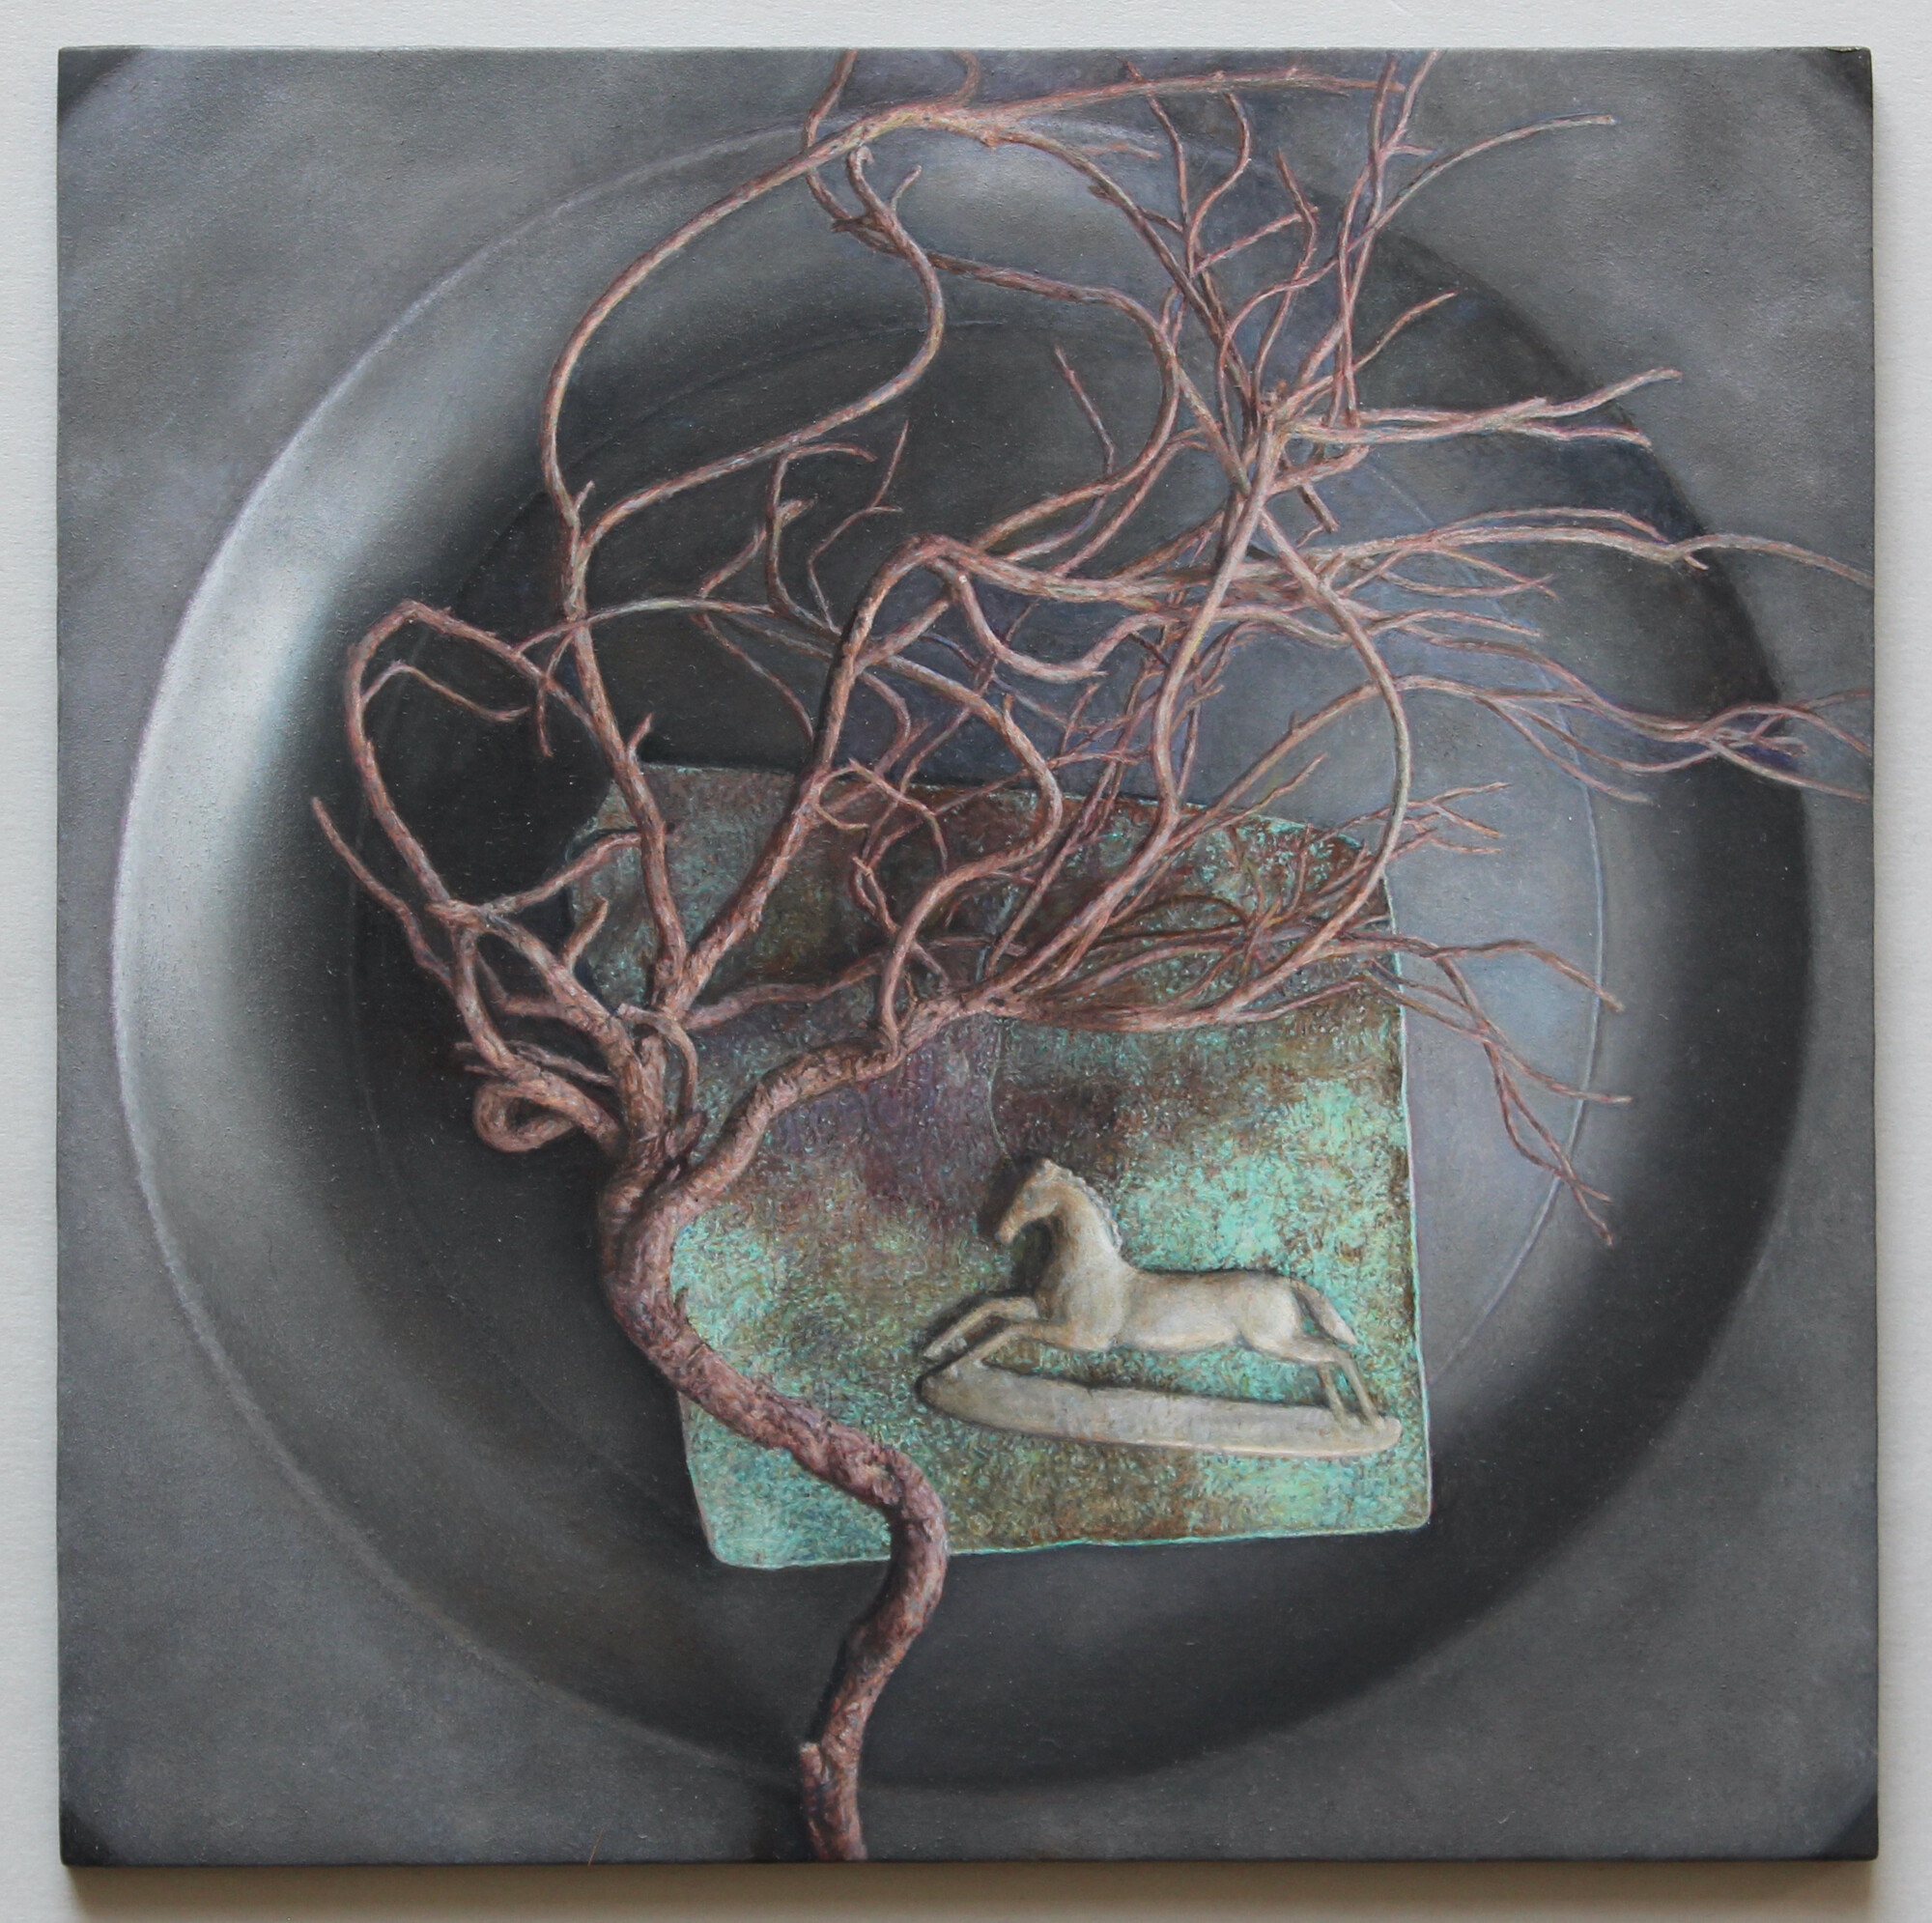 Lucy Mackenzie, "Pewter Plate with Found Objects (Horse and Branch)," 2020, oil on board, 5 ½ x 5 ½ inches 